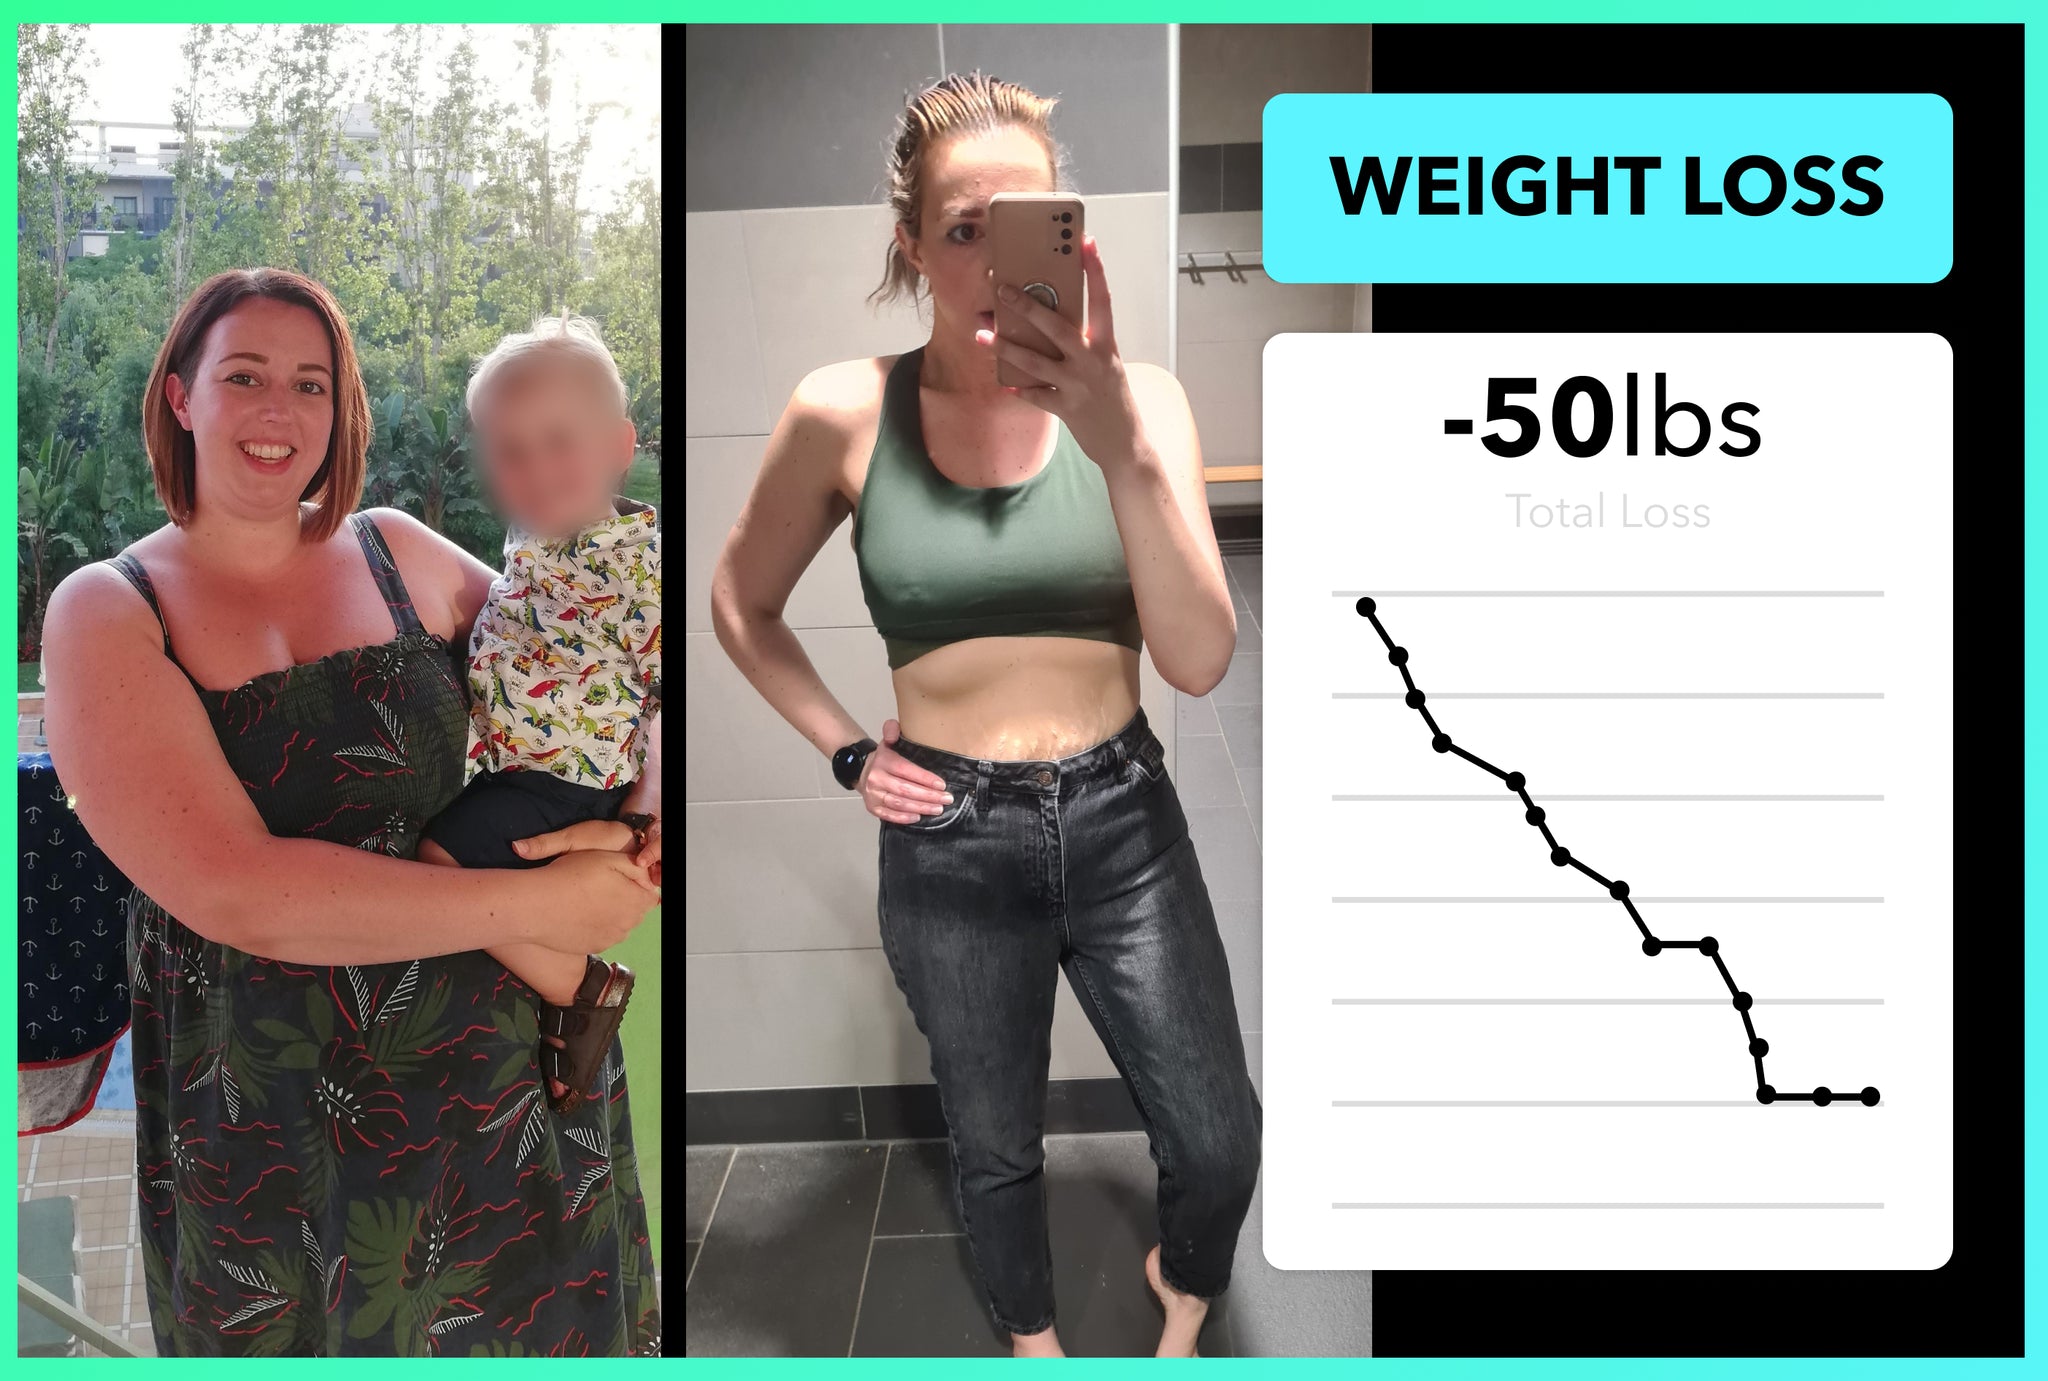 Here's how Hannah lost 50lbs with Team RH